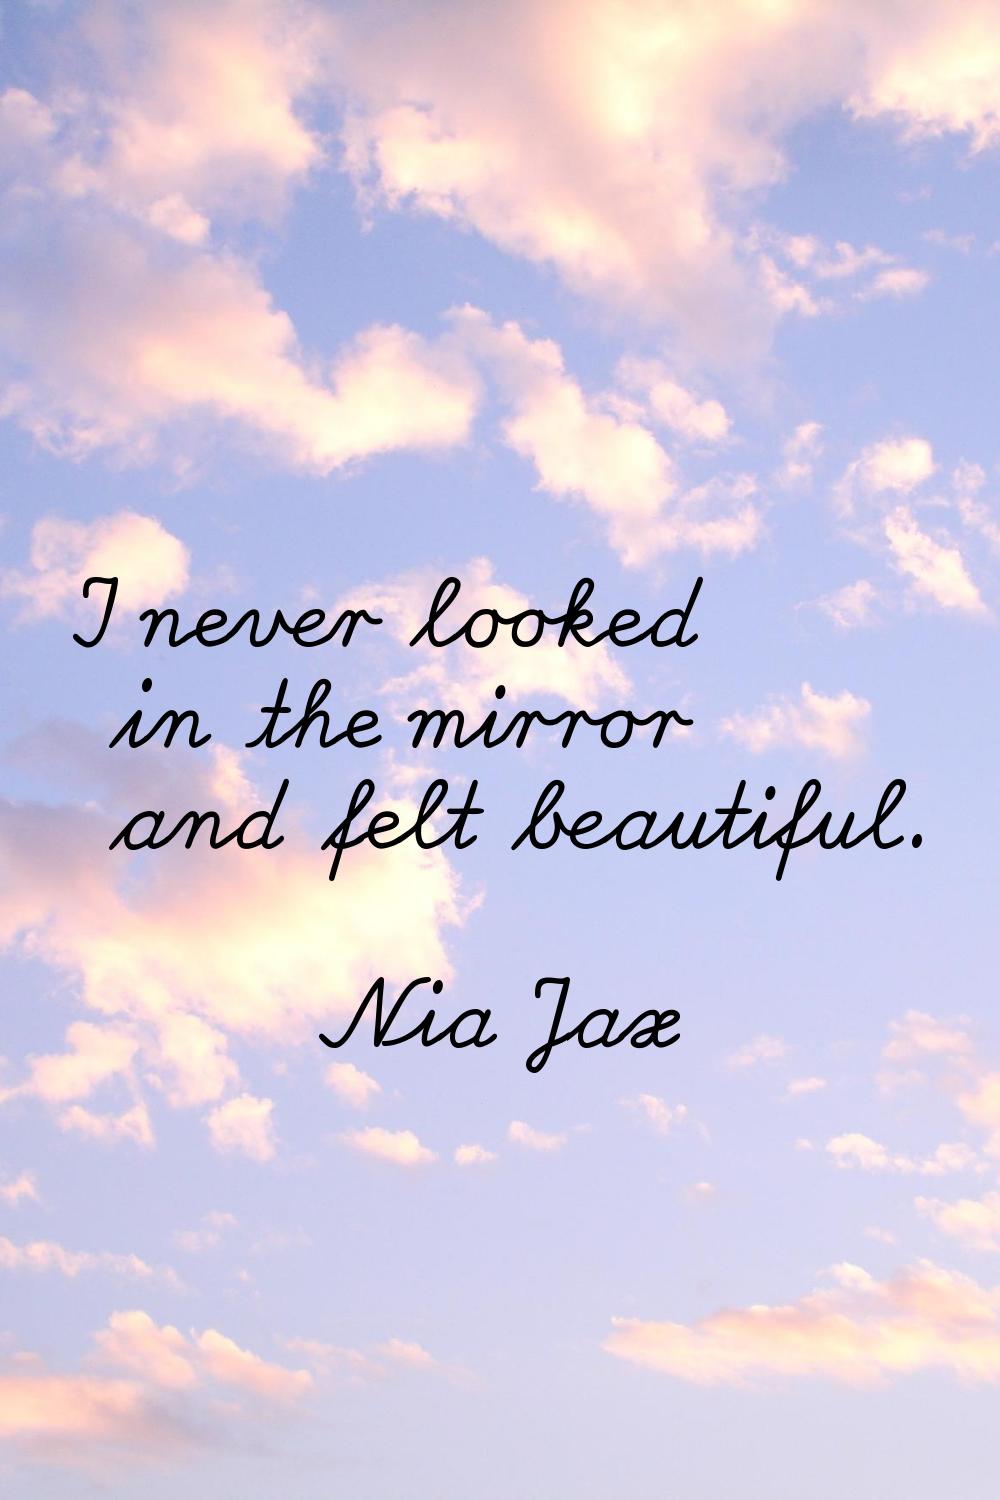 I never looked in the mirror and felt beautiful.